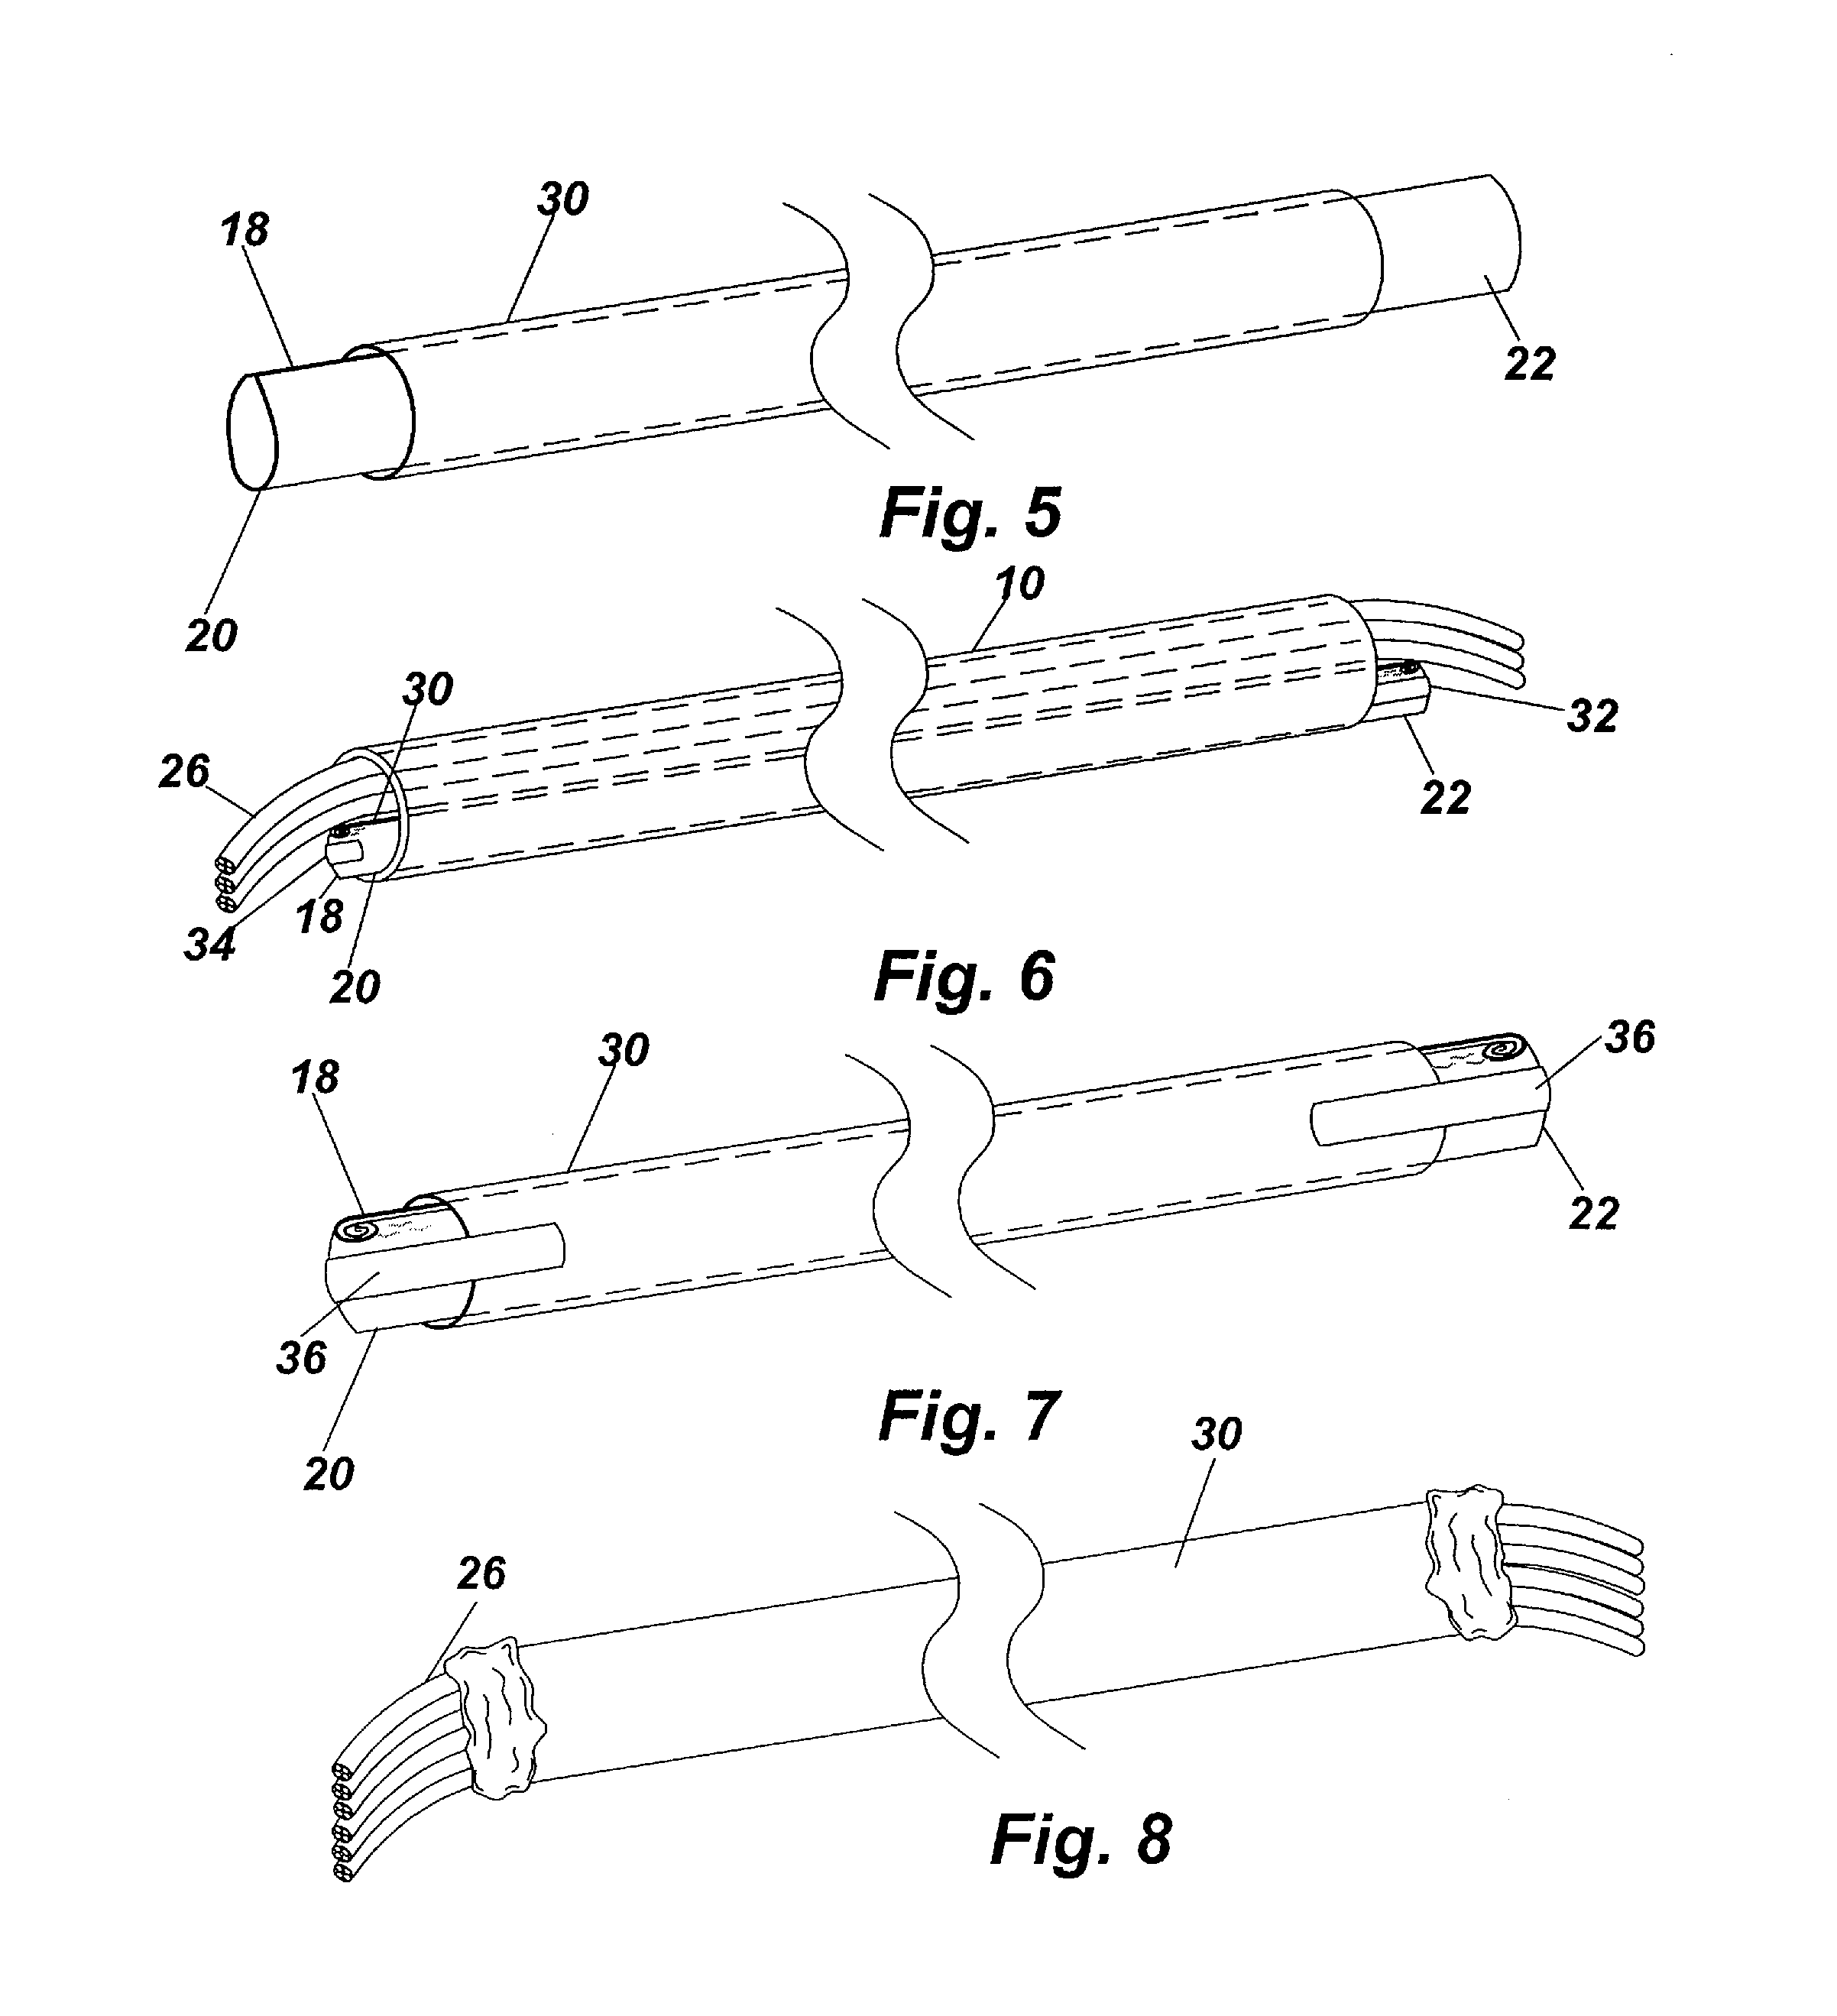 Method and Device for Suppressing Electrical Fires in Underground Conduit